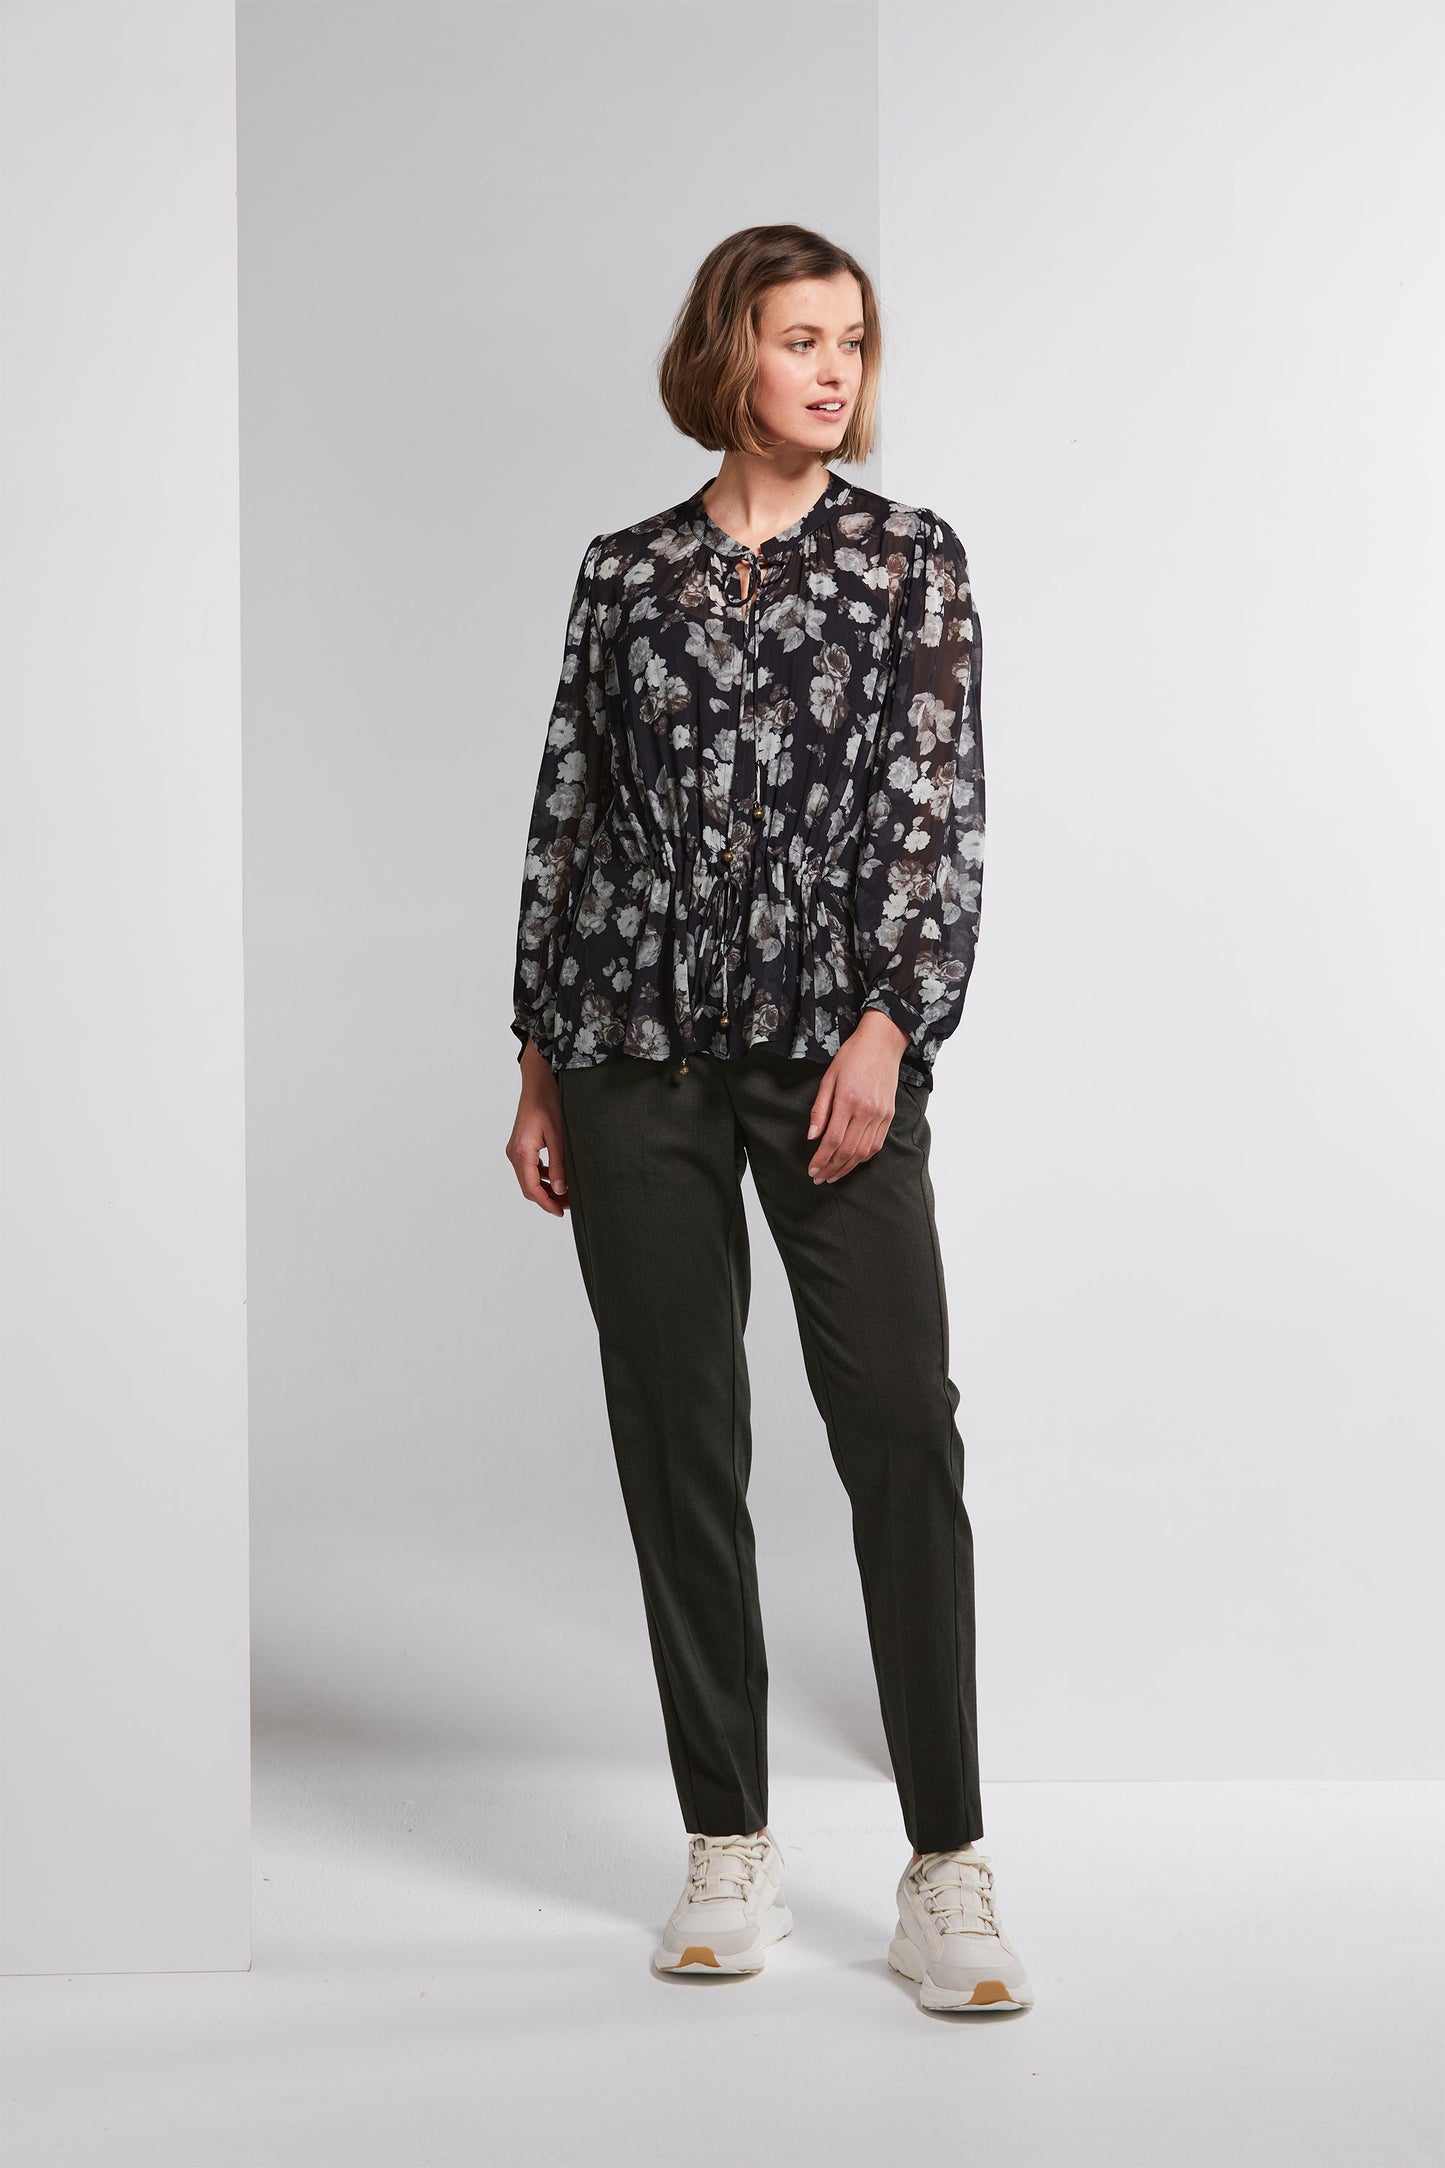 LANIA STIRLING SHIRT - STIRLING PRINT - THE VOGUE STORE